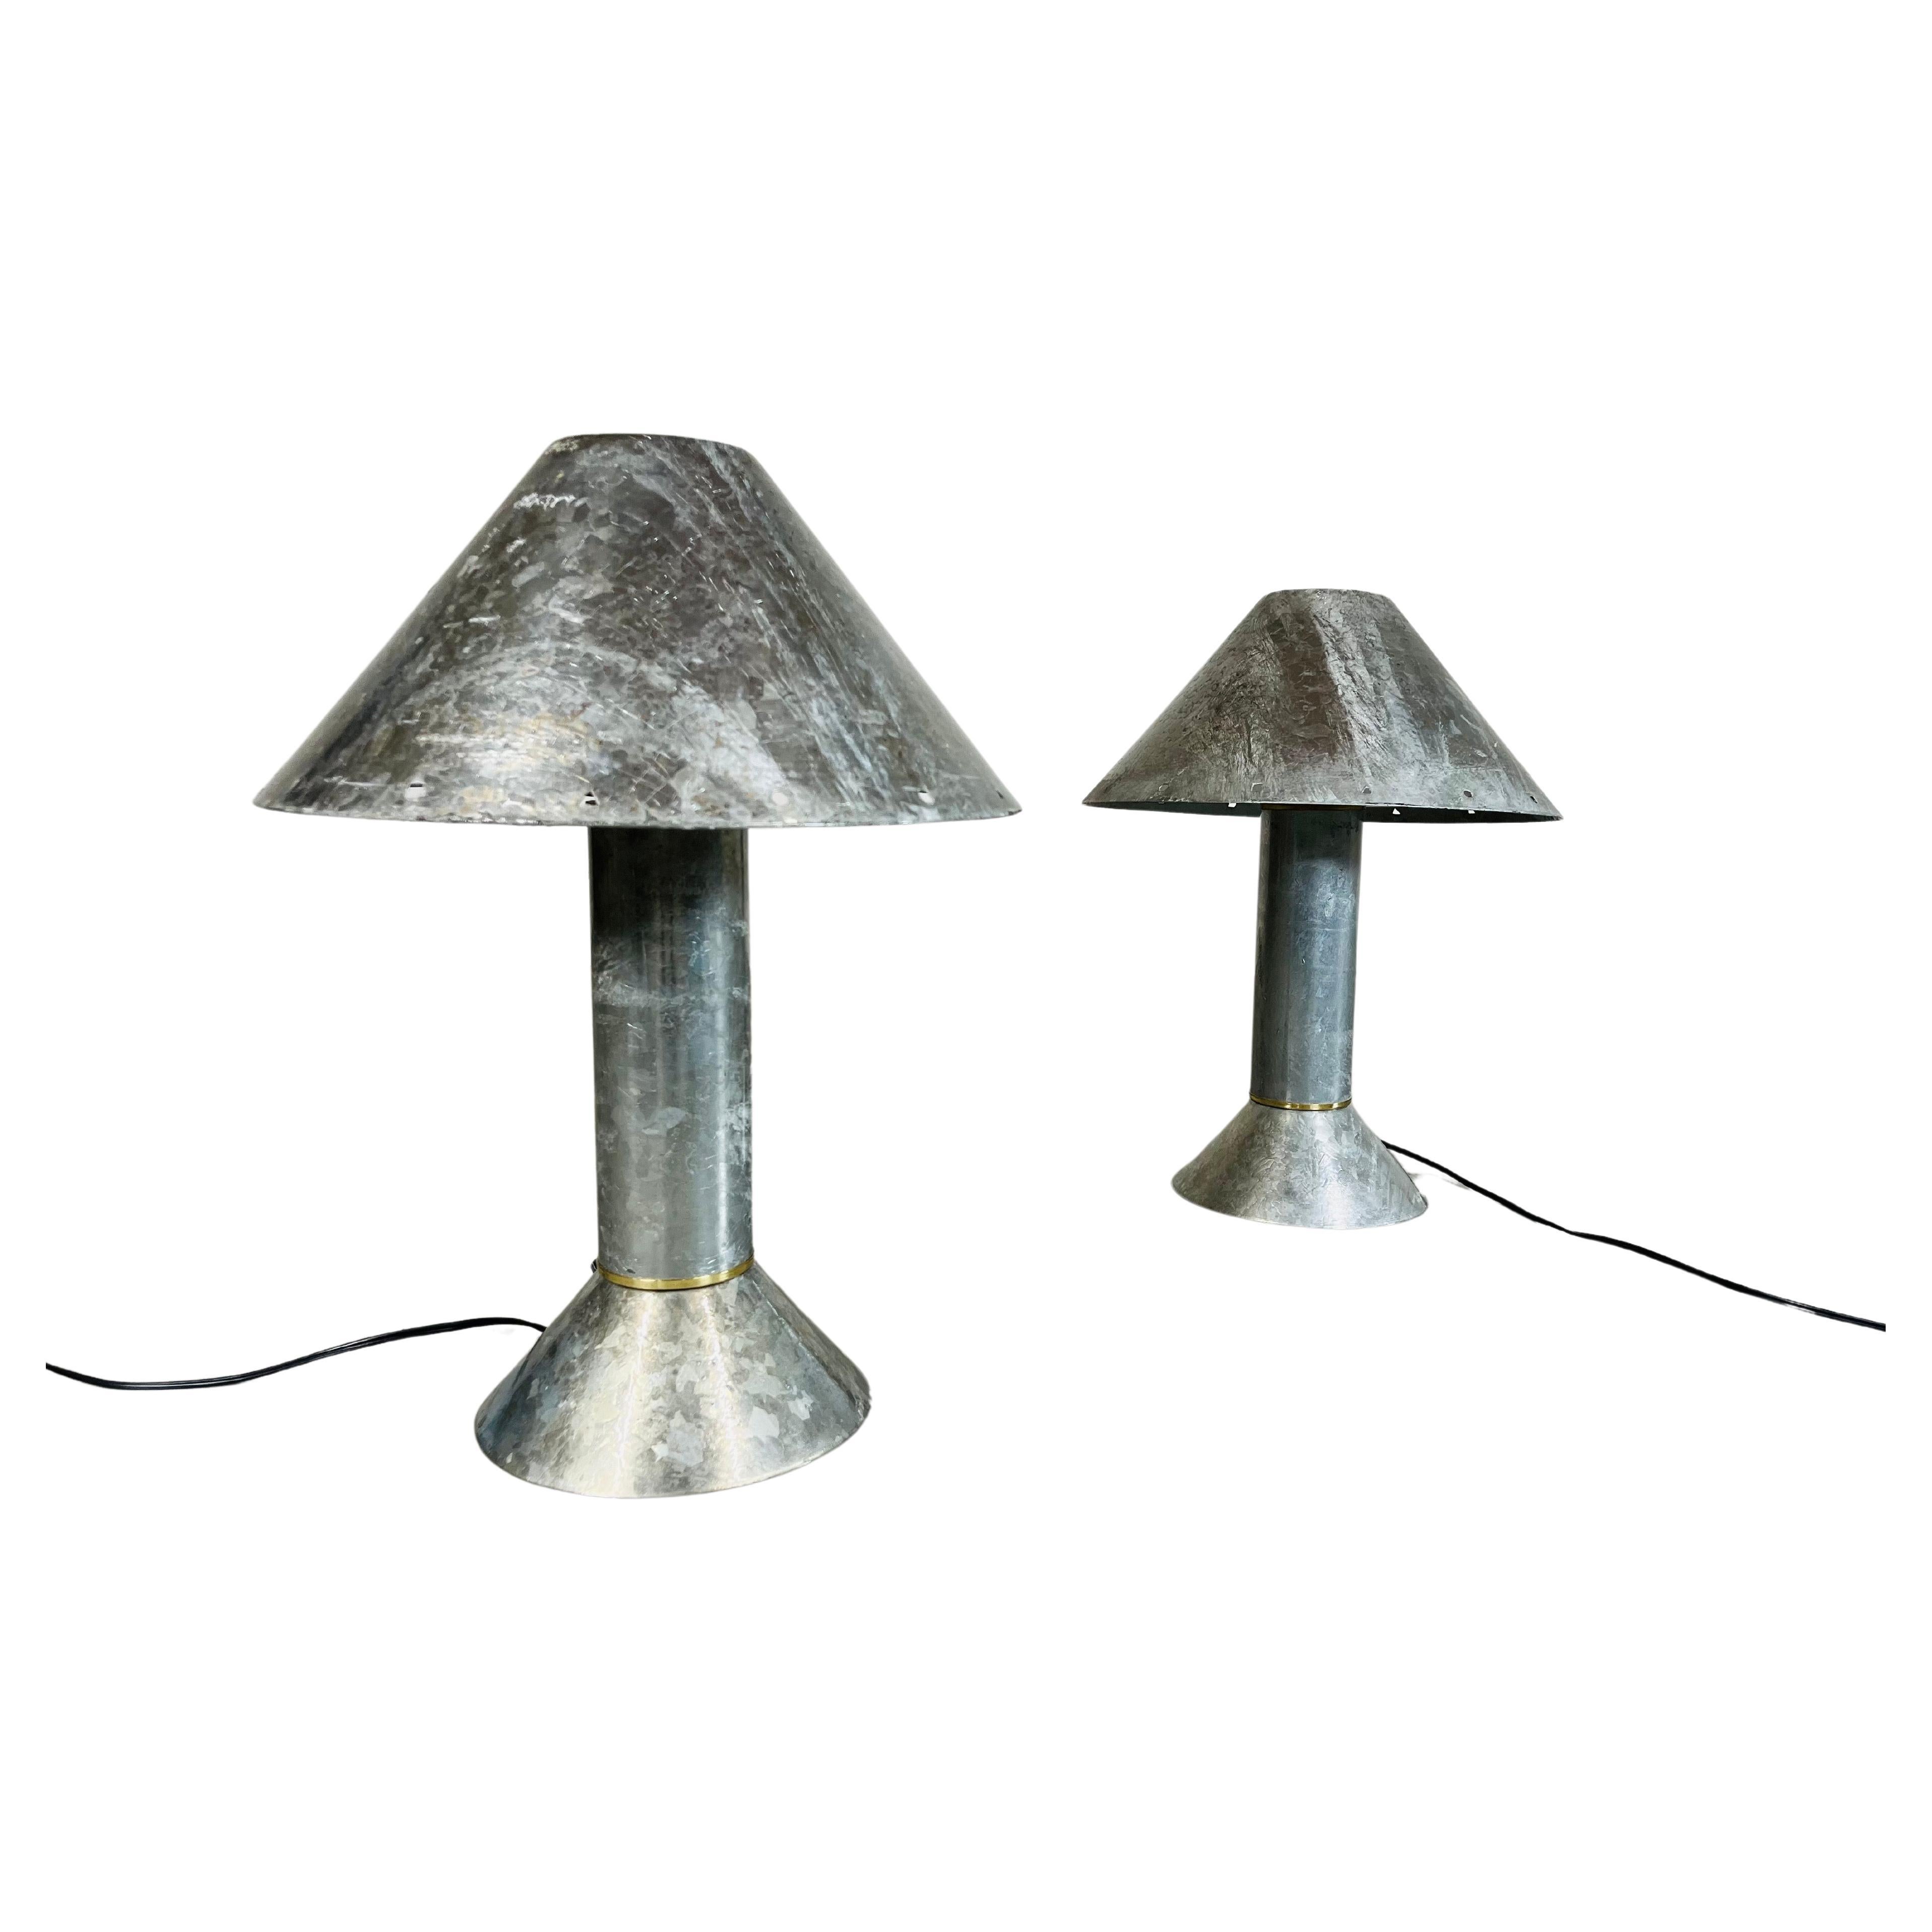 Rare Pair Of Ron Rezek Zinc Plated Modern Industrial Table Lamps Circa 1975 For Sale